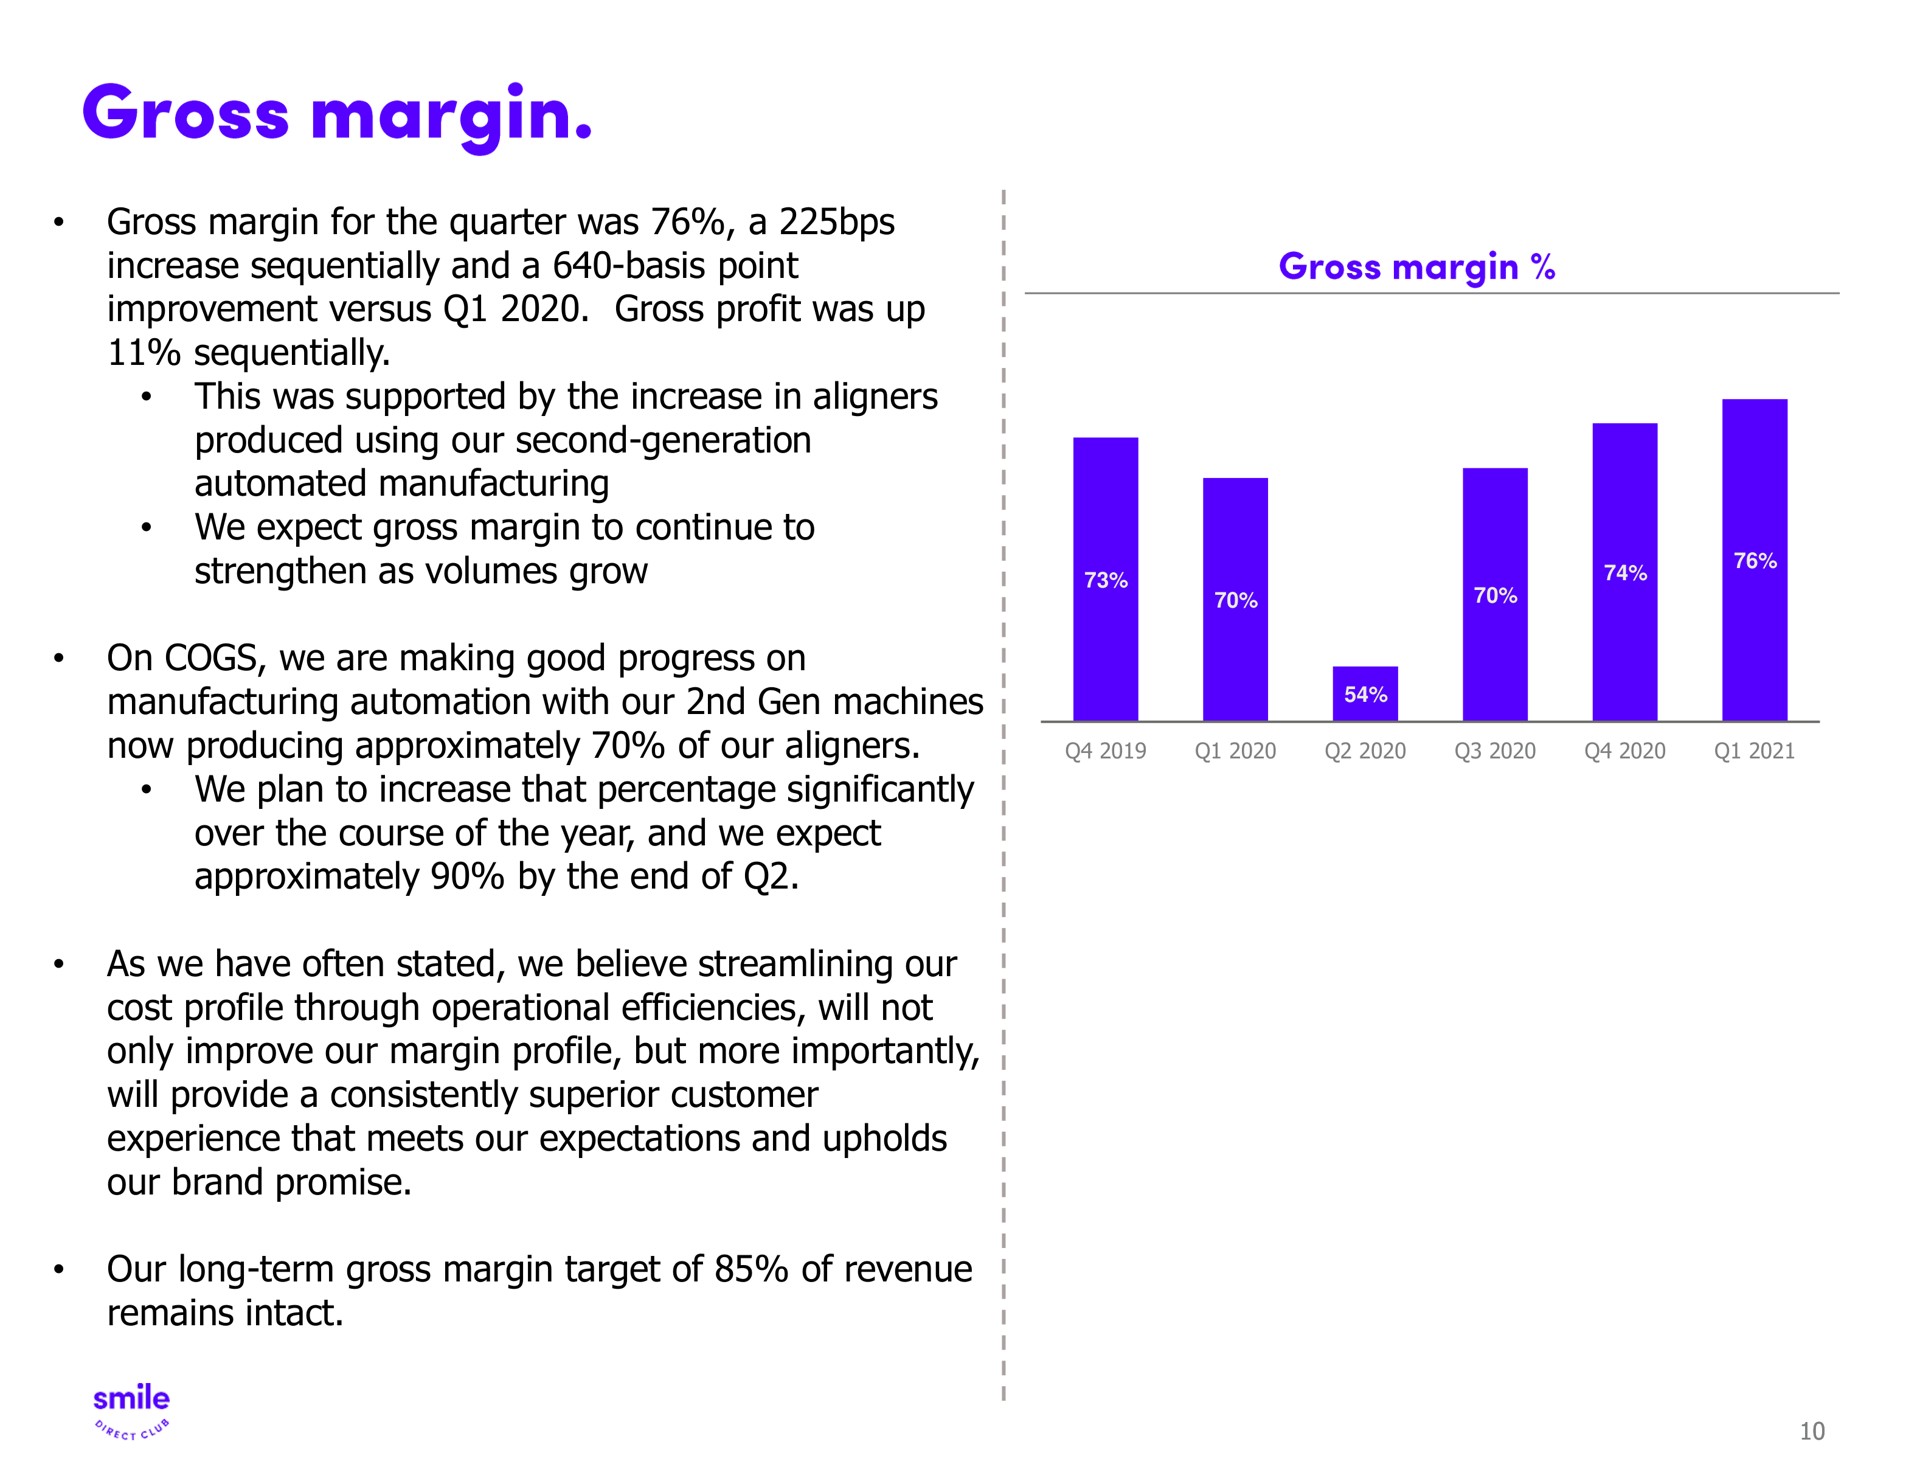 gross margin for the quarter was a increase sequentially and a basis point improvement versus gross profit was up sequentially this was supported by the increase in produced using our second generation manufacturing we expect gross margin to continue to strengthen as volumes grow on cogs we are making good progress on manufacturing with our gen machines now producing approximately of our we plan to increase that percentage significantly over the course of the year and we expect approximately by the end of as we have often stated we believe streamlining our cost profile through operational efficiencies will not only improve our margin profile but more importantly will provide a consistently superior customer experience that meets our expectations and upholds our brand promise our long term gross margin target of of revenue remains intact | SmileDirectClub